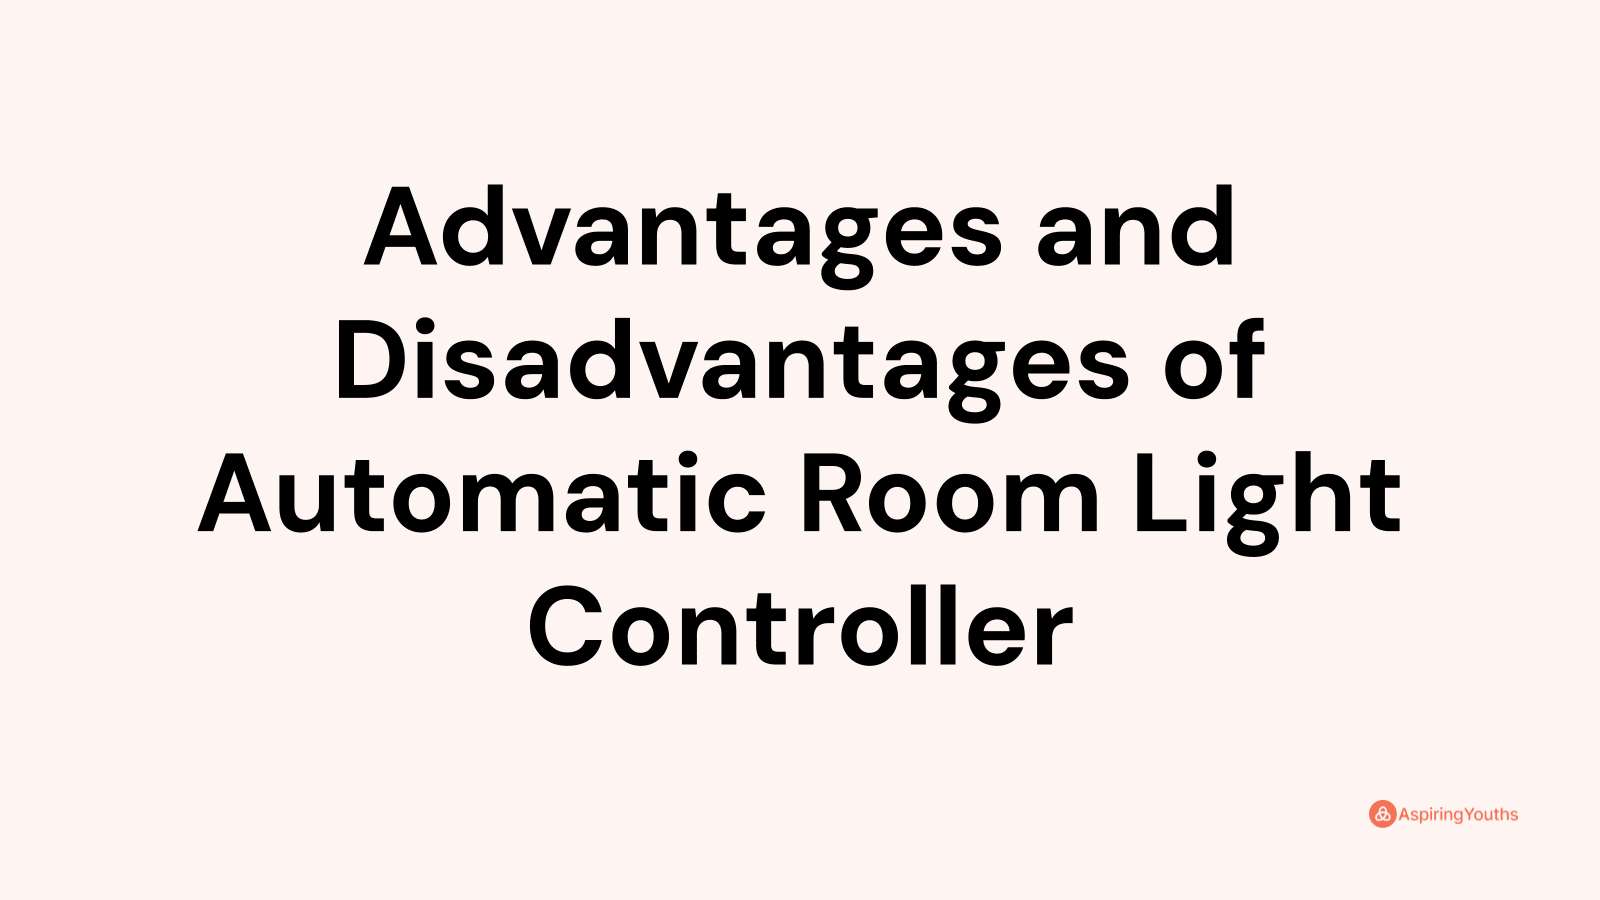 Advantages and disadvantages of Automatic Room Light Controller